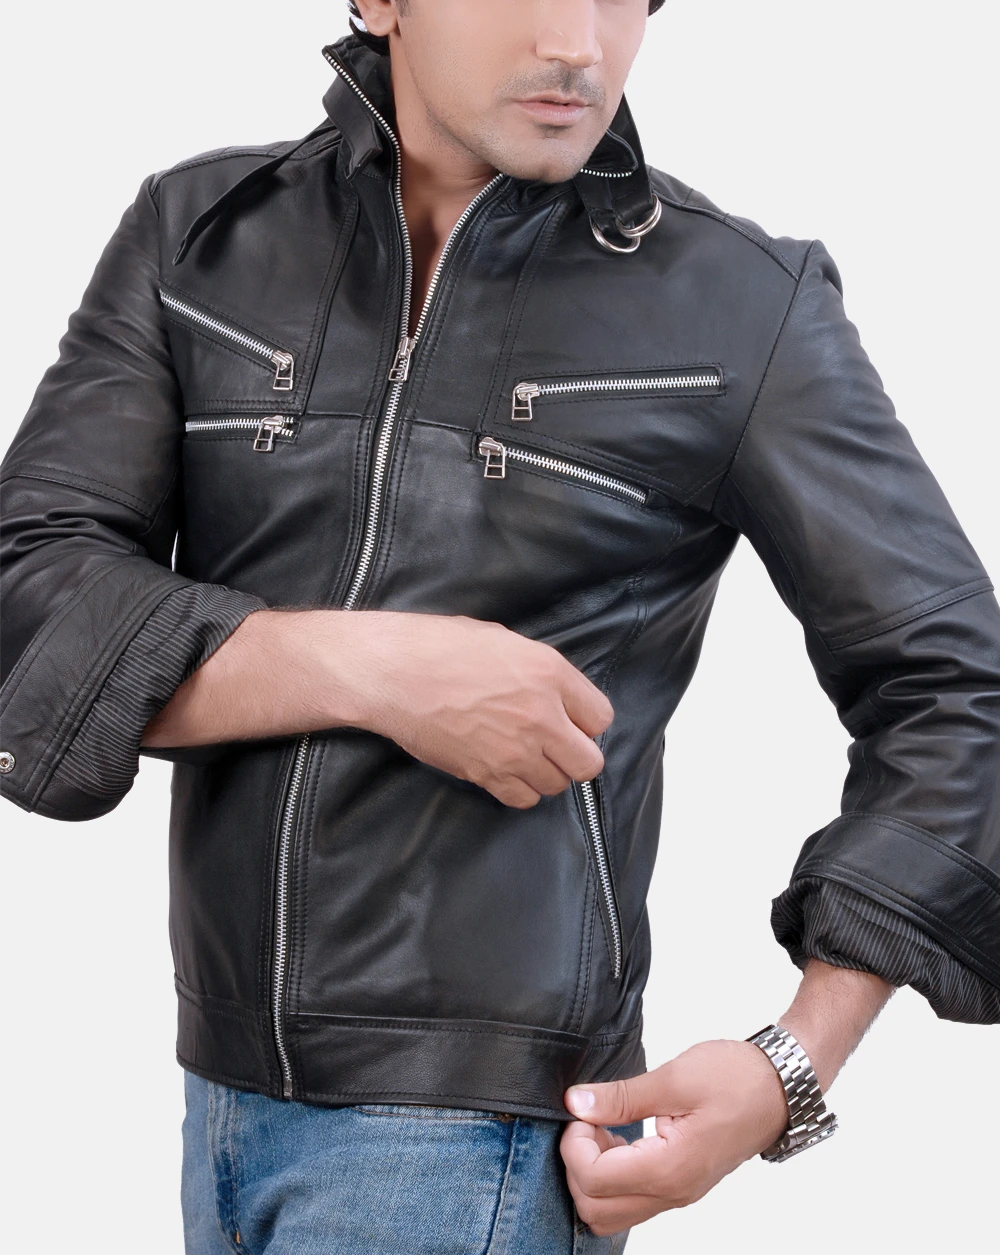 Dior light weight bomber leather jacket